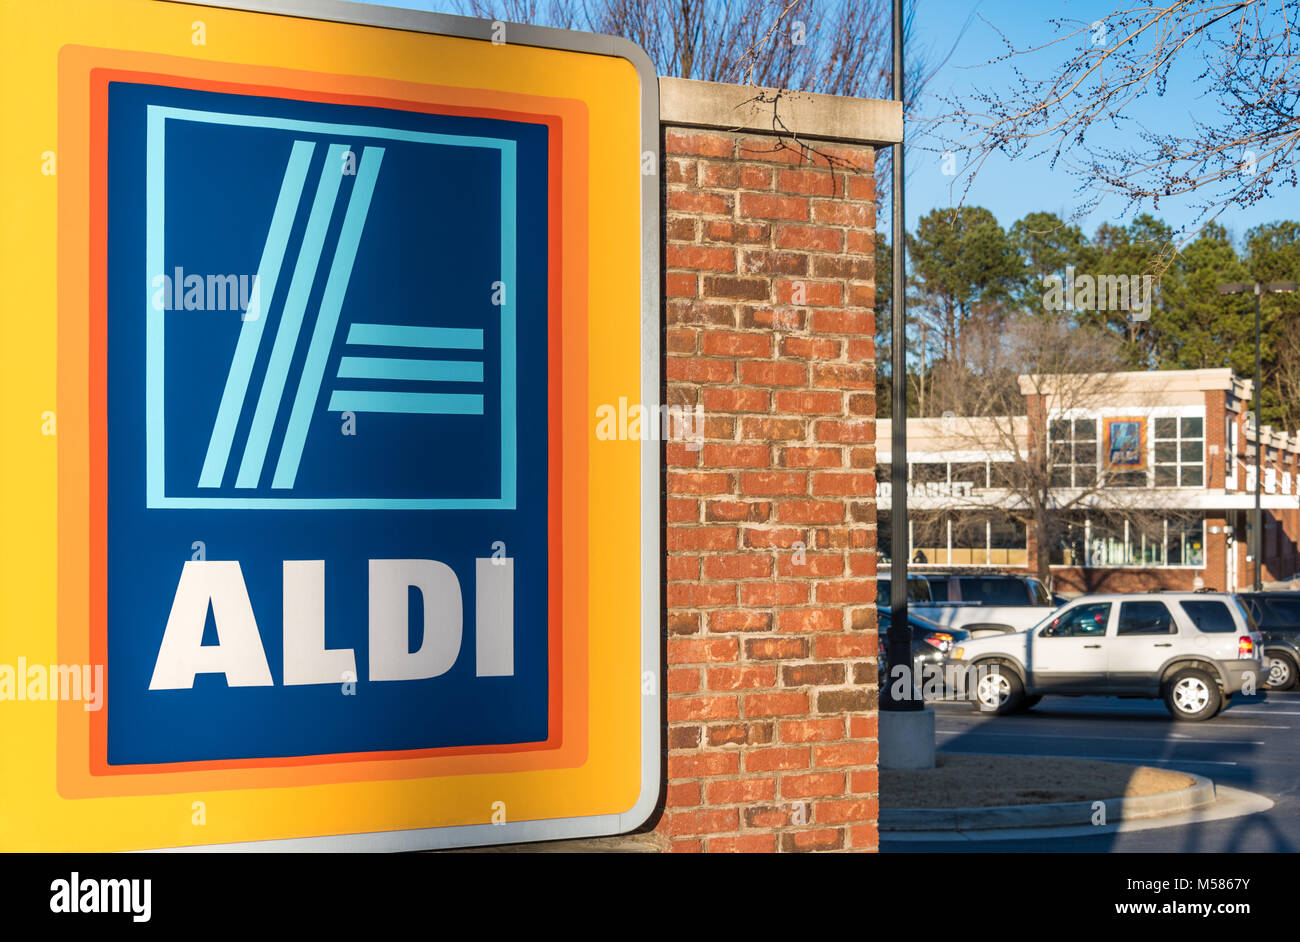 ALDI store in Metro Atlanta, Georgia is part of the international discount supermarket chain based in Germany with over 10,000 stores in 18 countries. Stock Photo